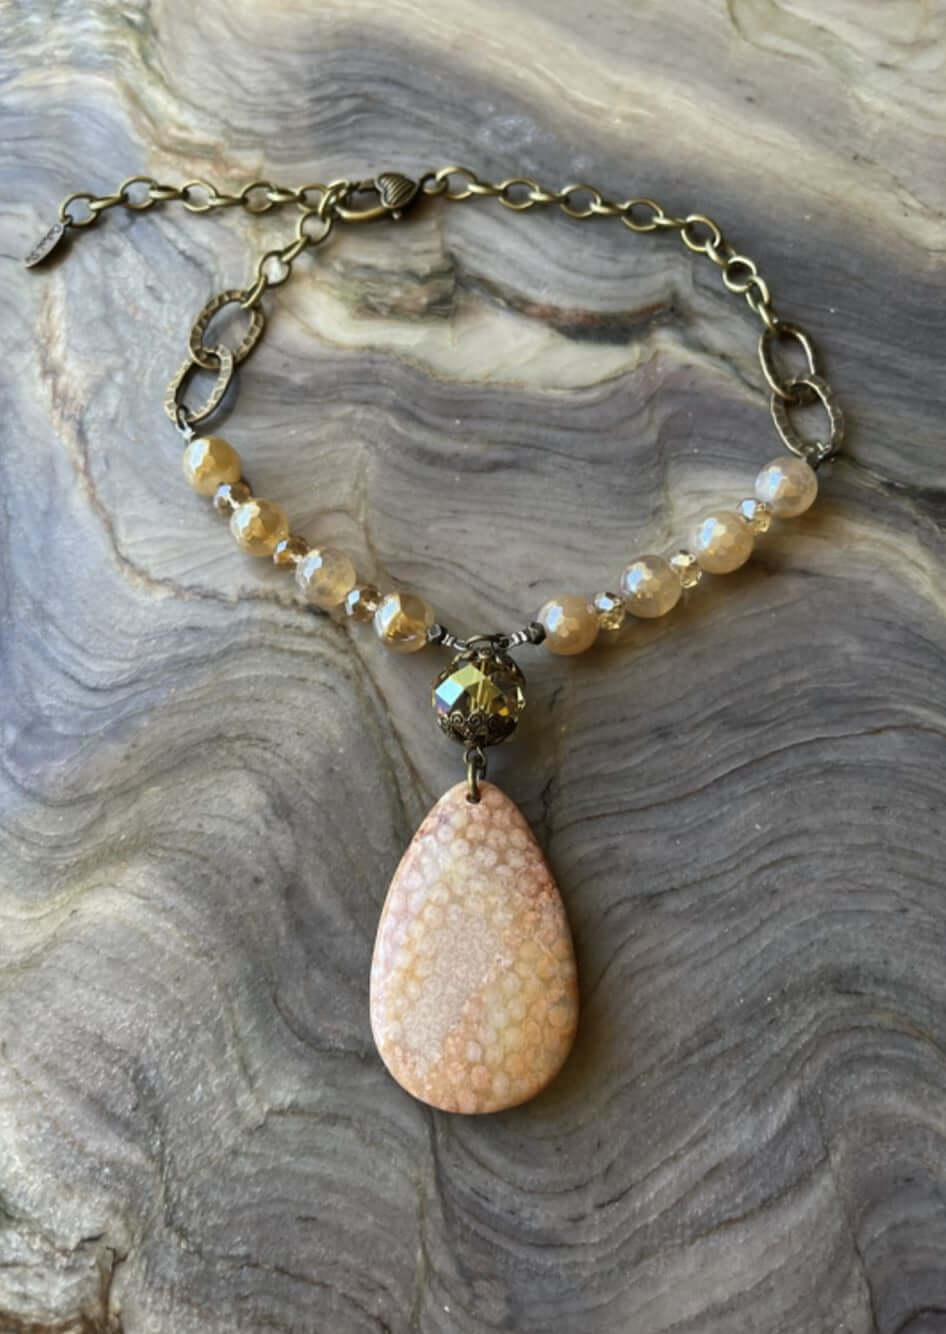 Ladies Coral Natural Stone Pendant Beaded Necklace. Handmade in USA, This beautiful piece has an adjustable heart clasp.